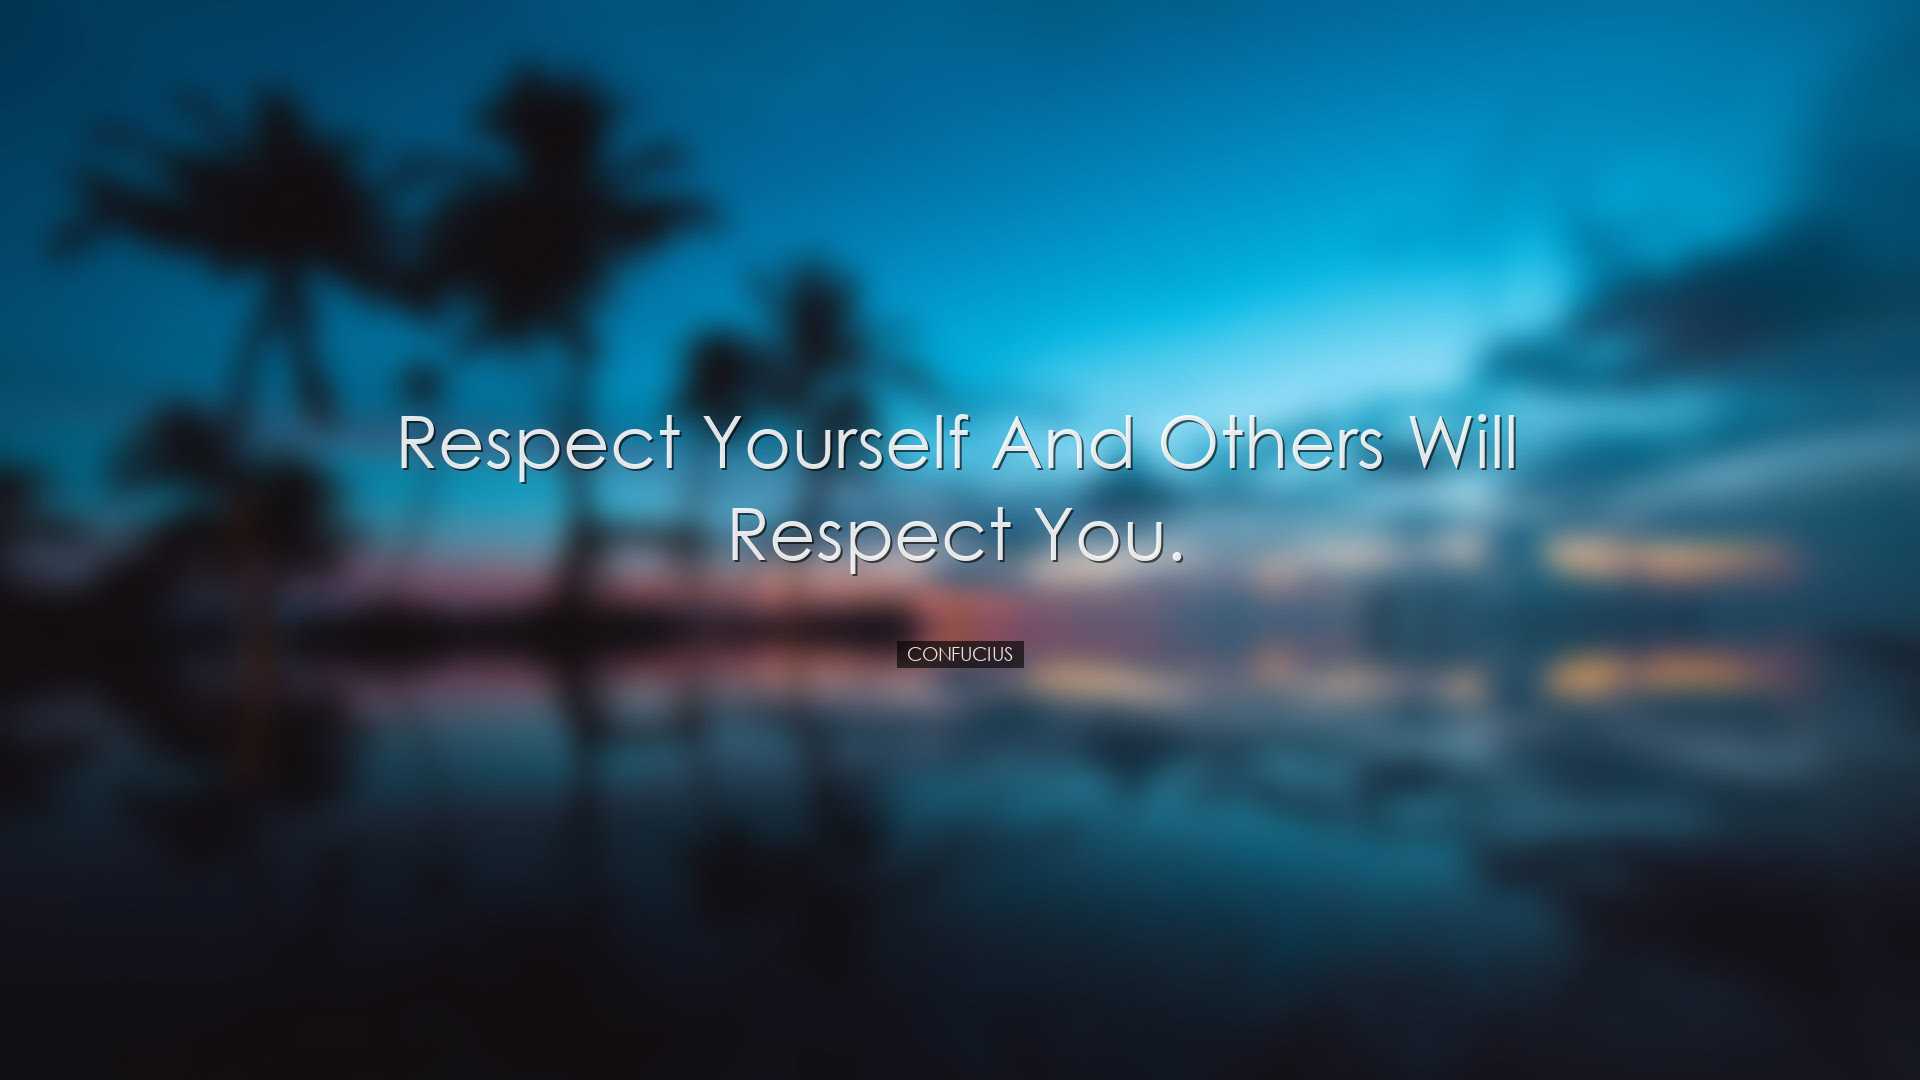 Respect yourself and others will respect you. - Confucius